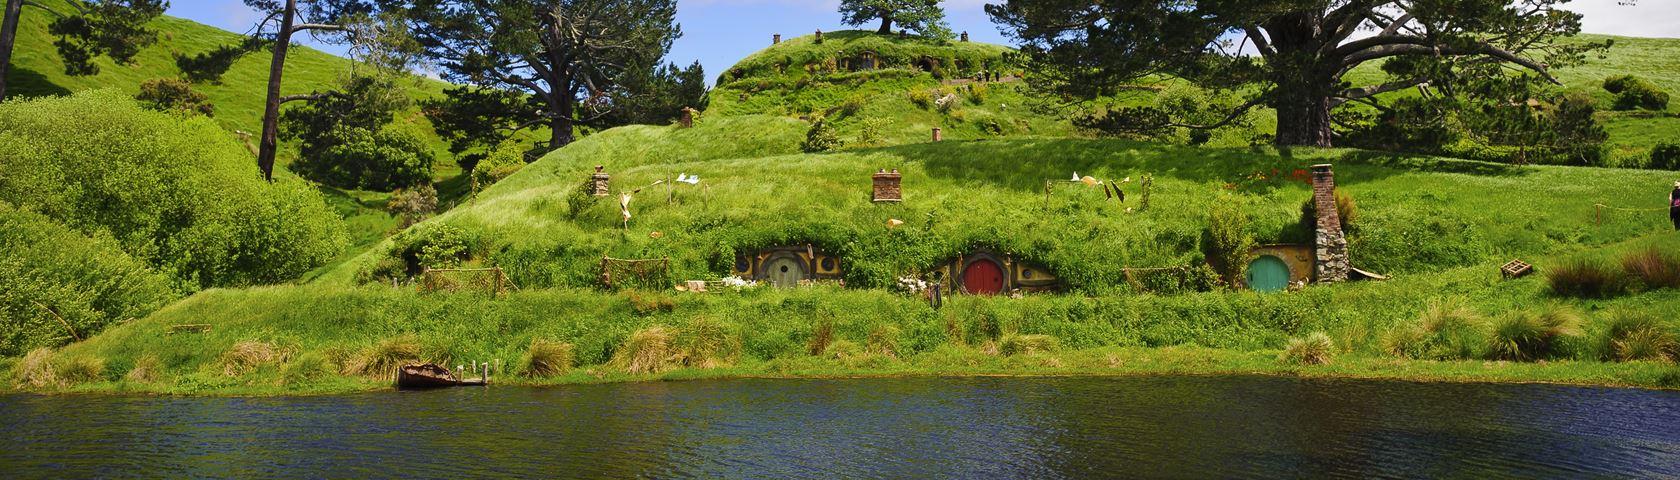 The shire HD wallpapers free download  Wallpaperbetter